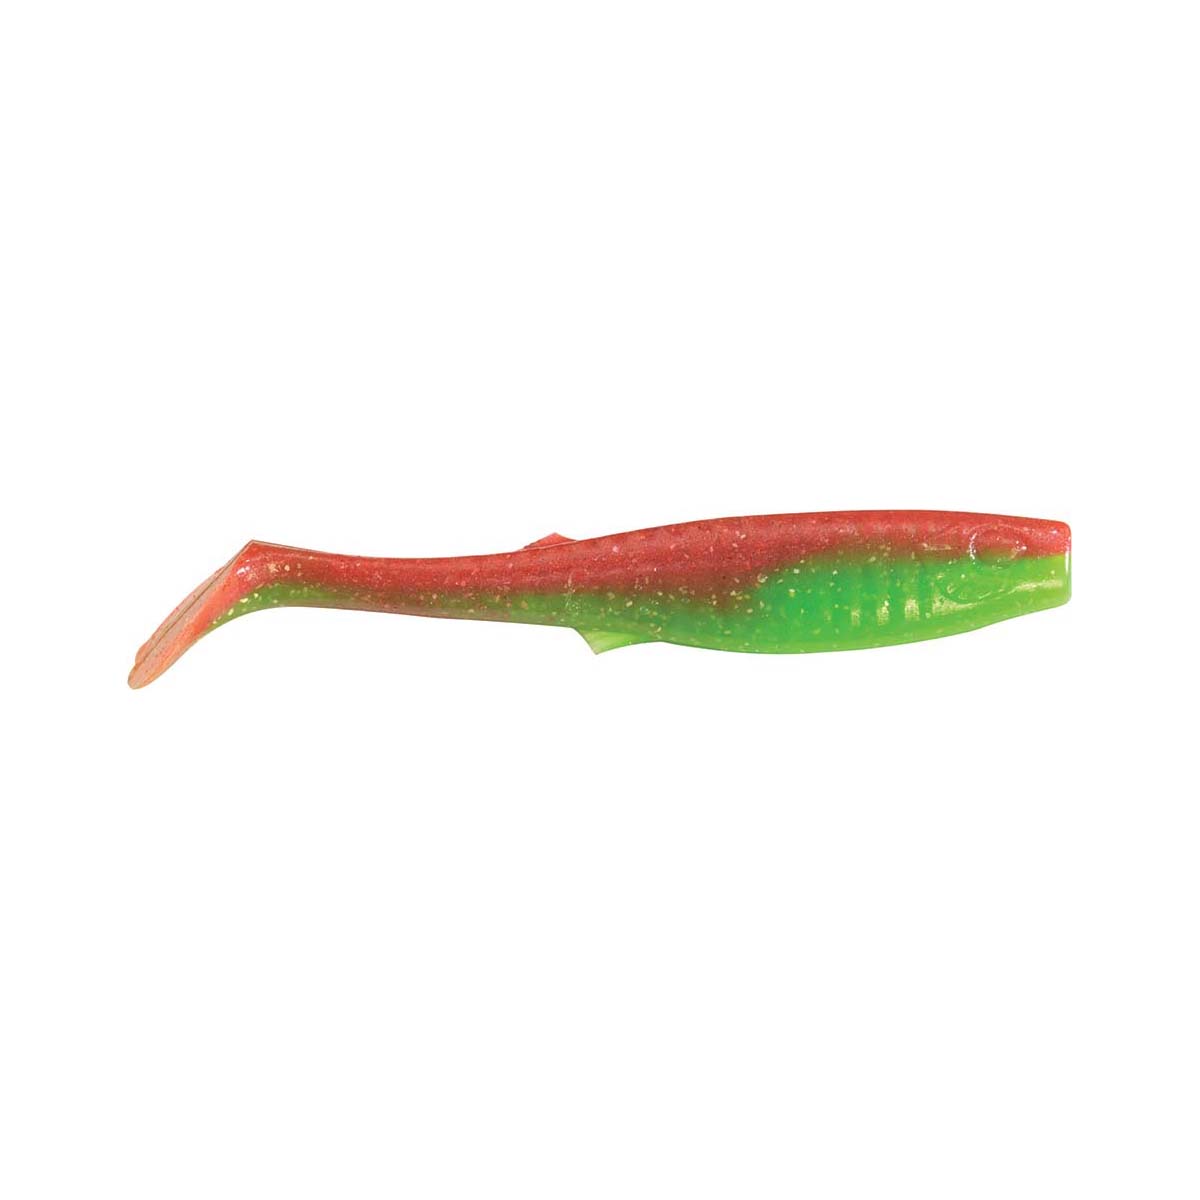 Berkley Gulp! Paddletail Shad Soft Plastic Lure 6in Nuclear Chicken